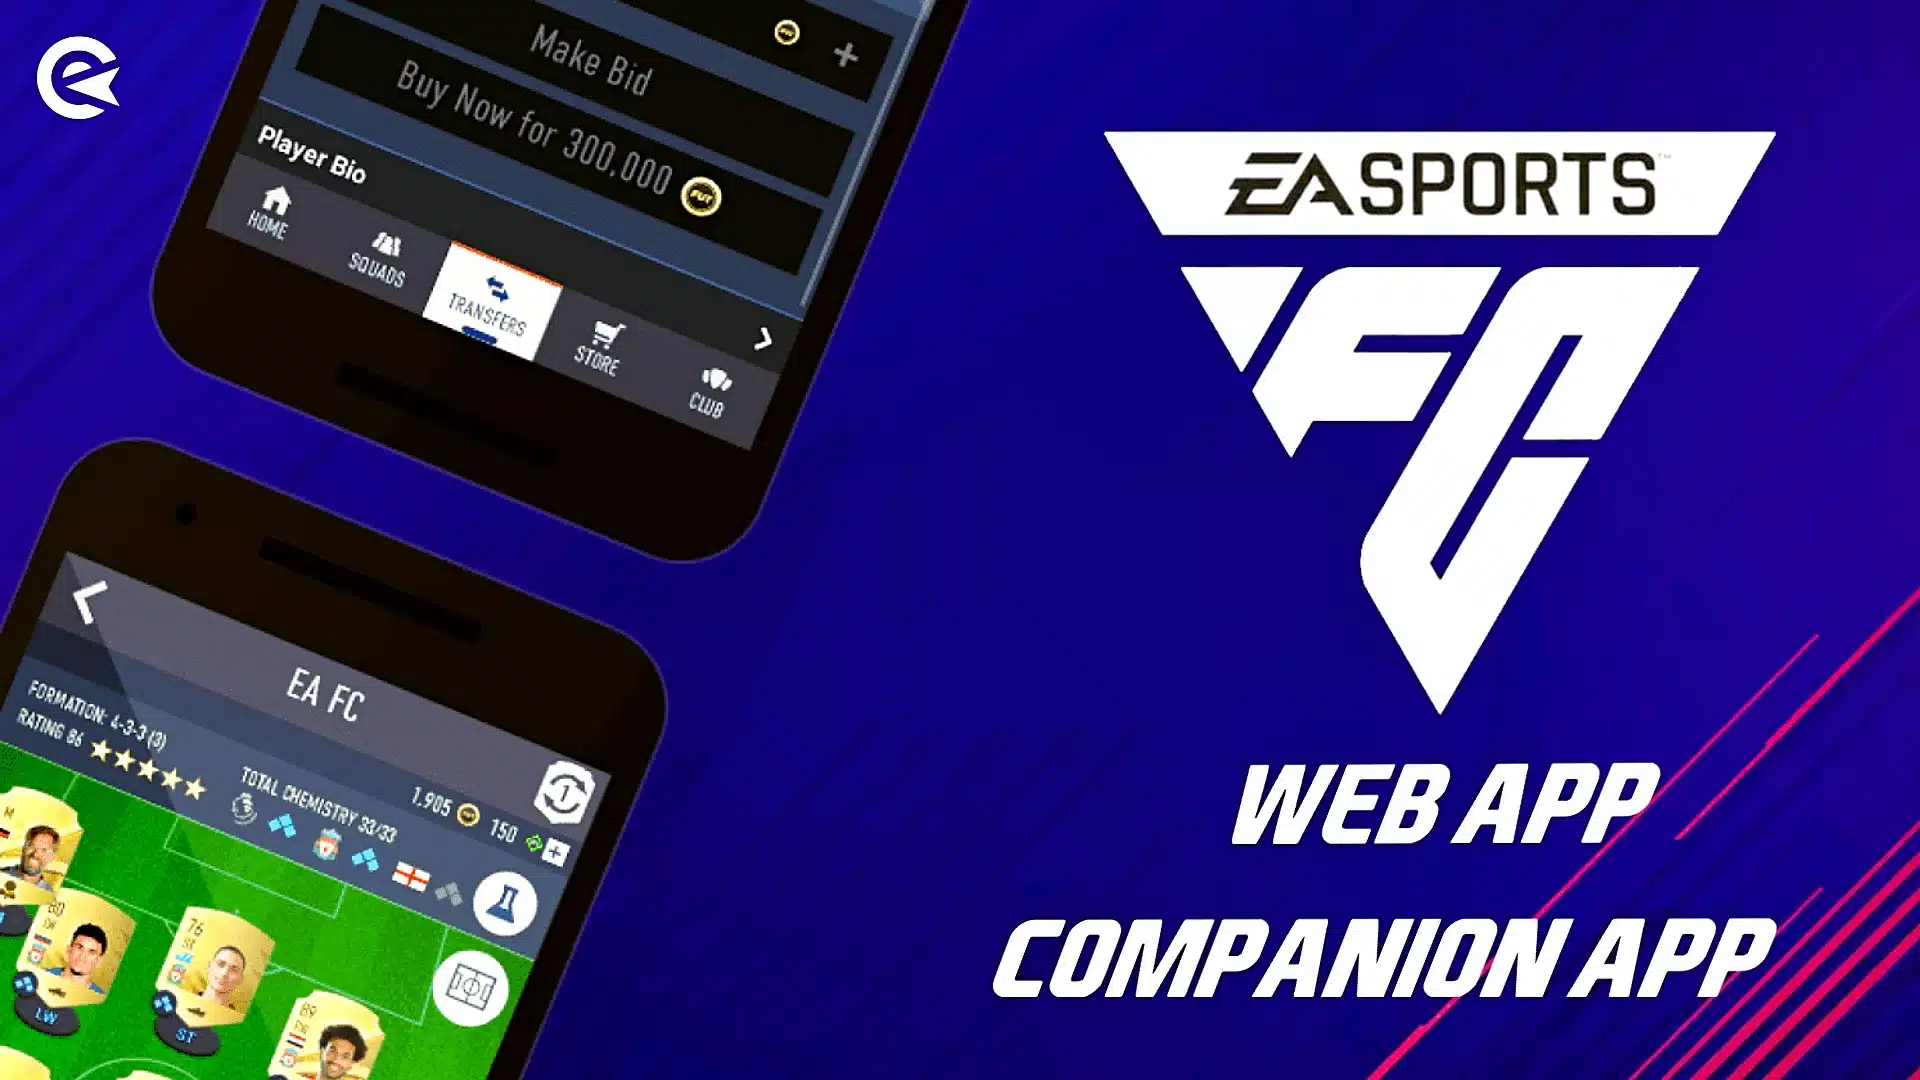 EAFC 24 Web App - Release, Content and Tips for the Launch